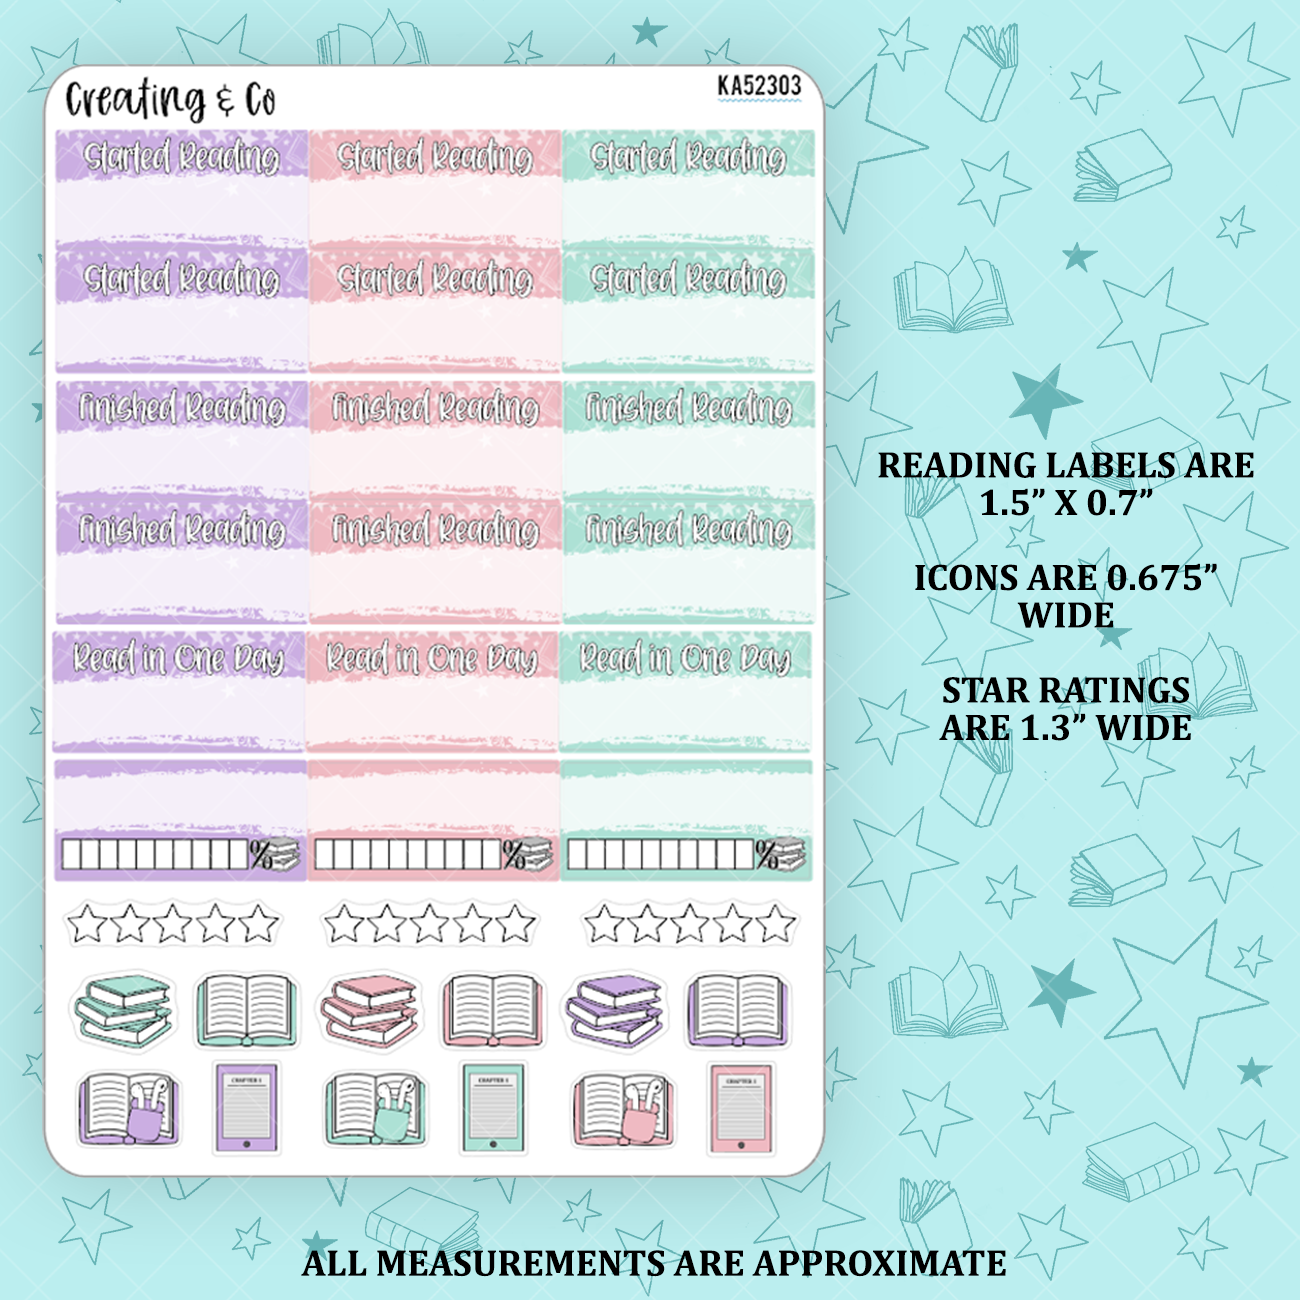 Scoops of Books Reading Sticker Kit Add On for Weekly Planner Kit  - KA52303